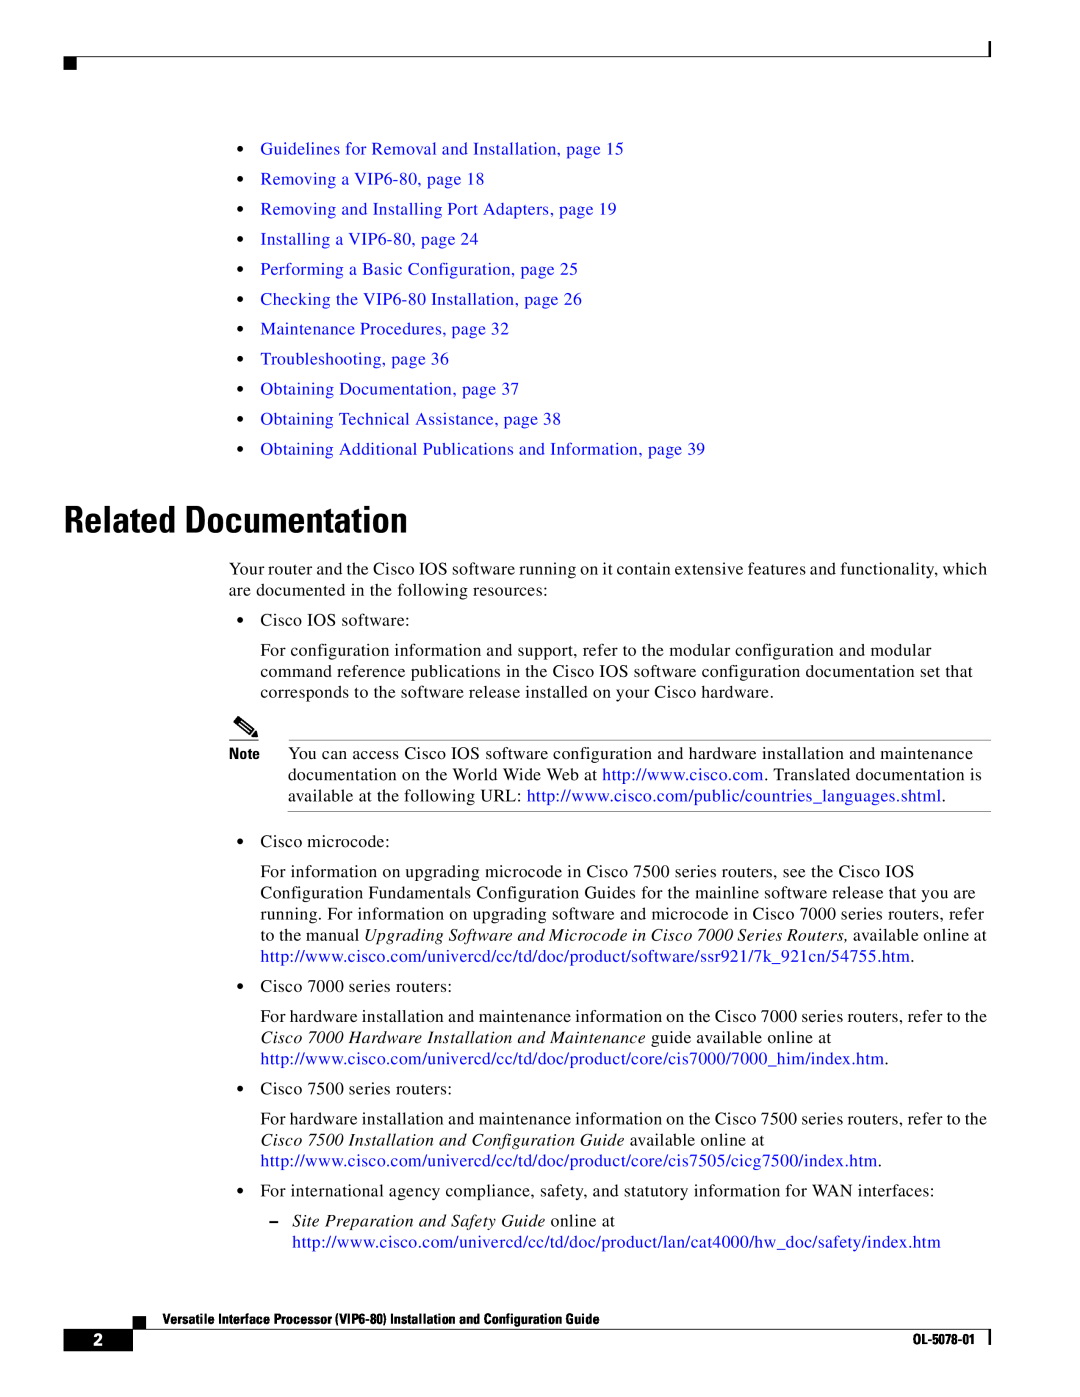 Cisco Systems (VIP6-80) manual Related Documentation, Guidelines for Removal and Installation, page 